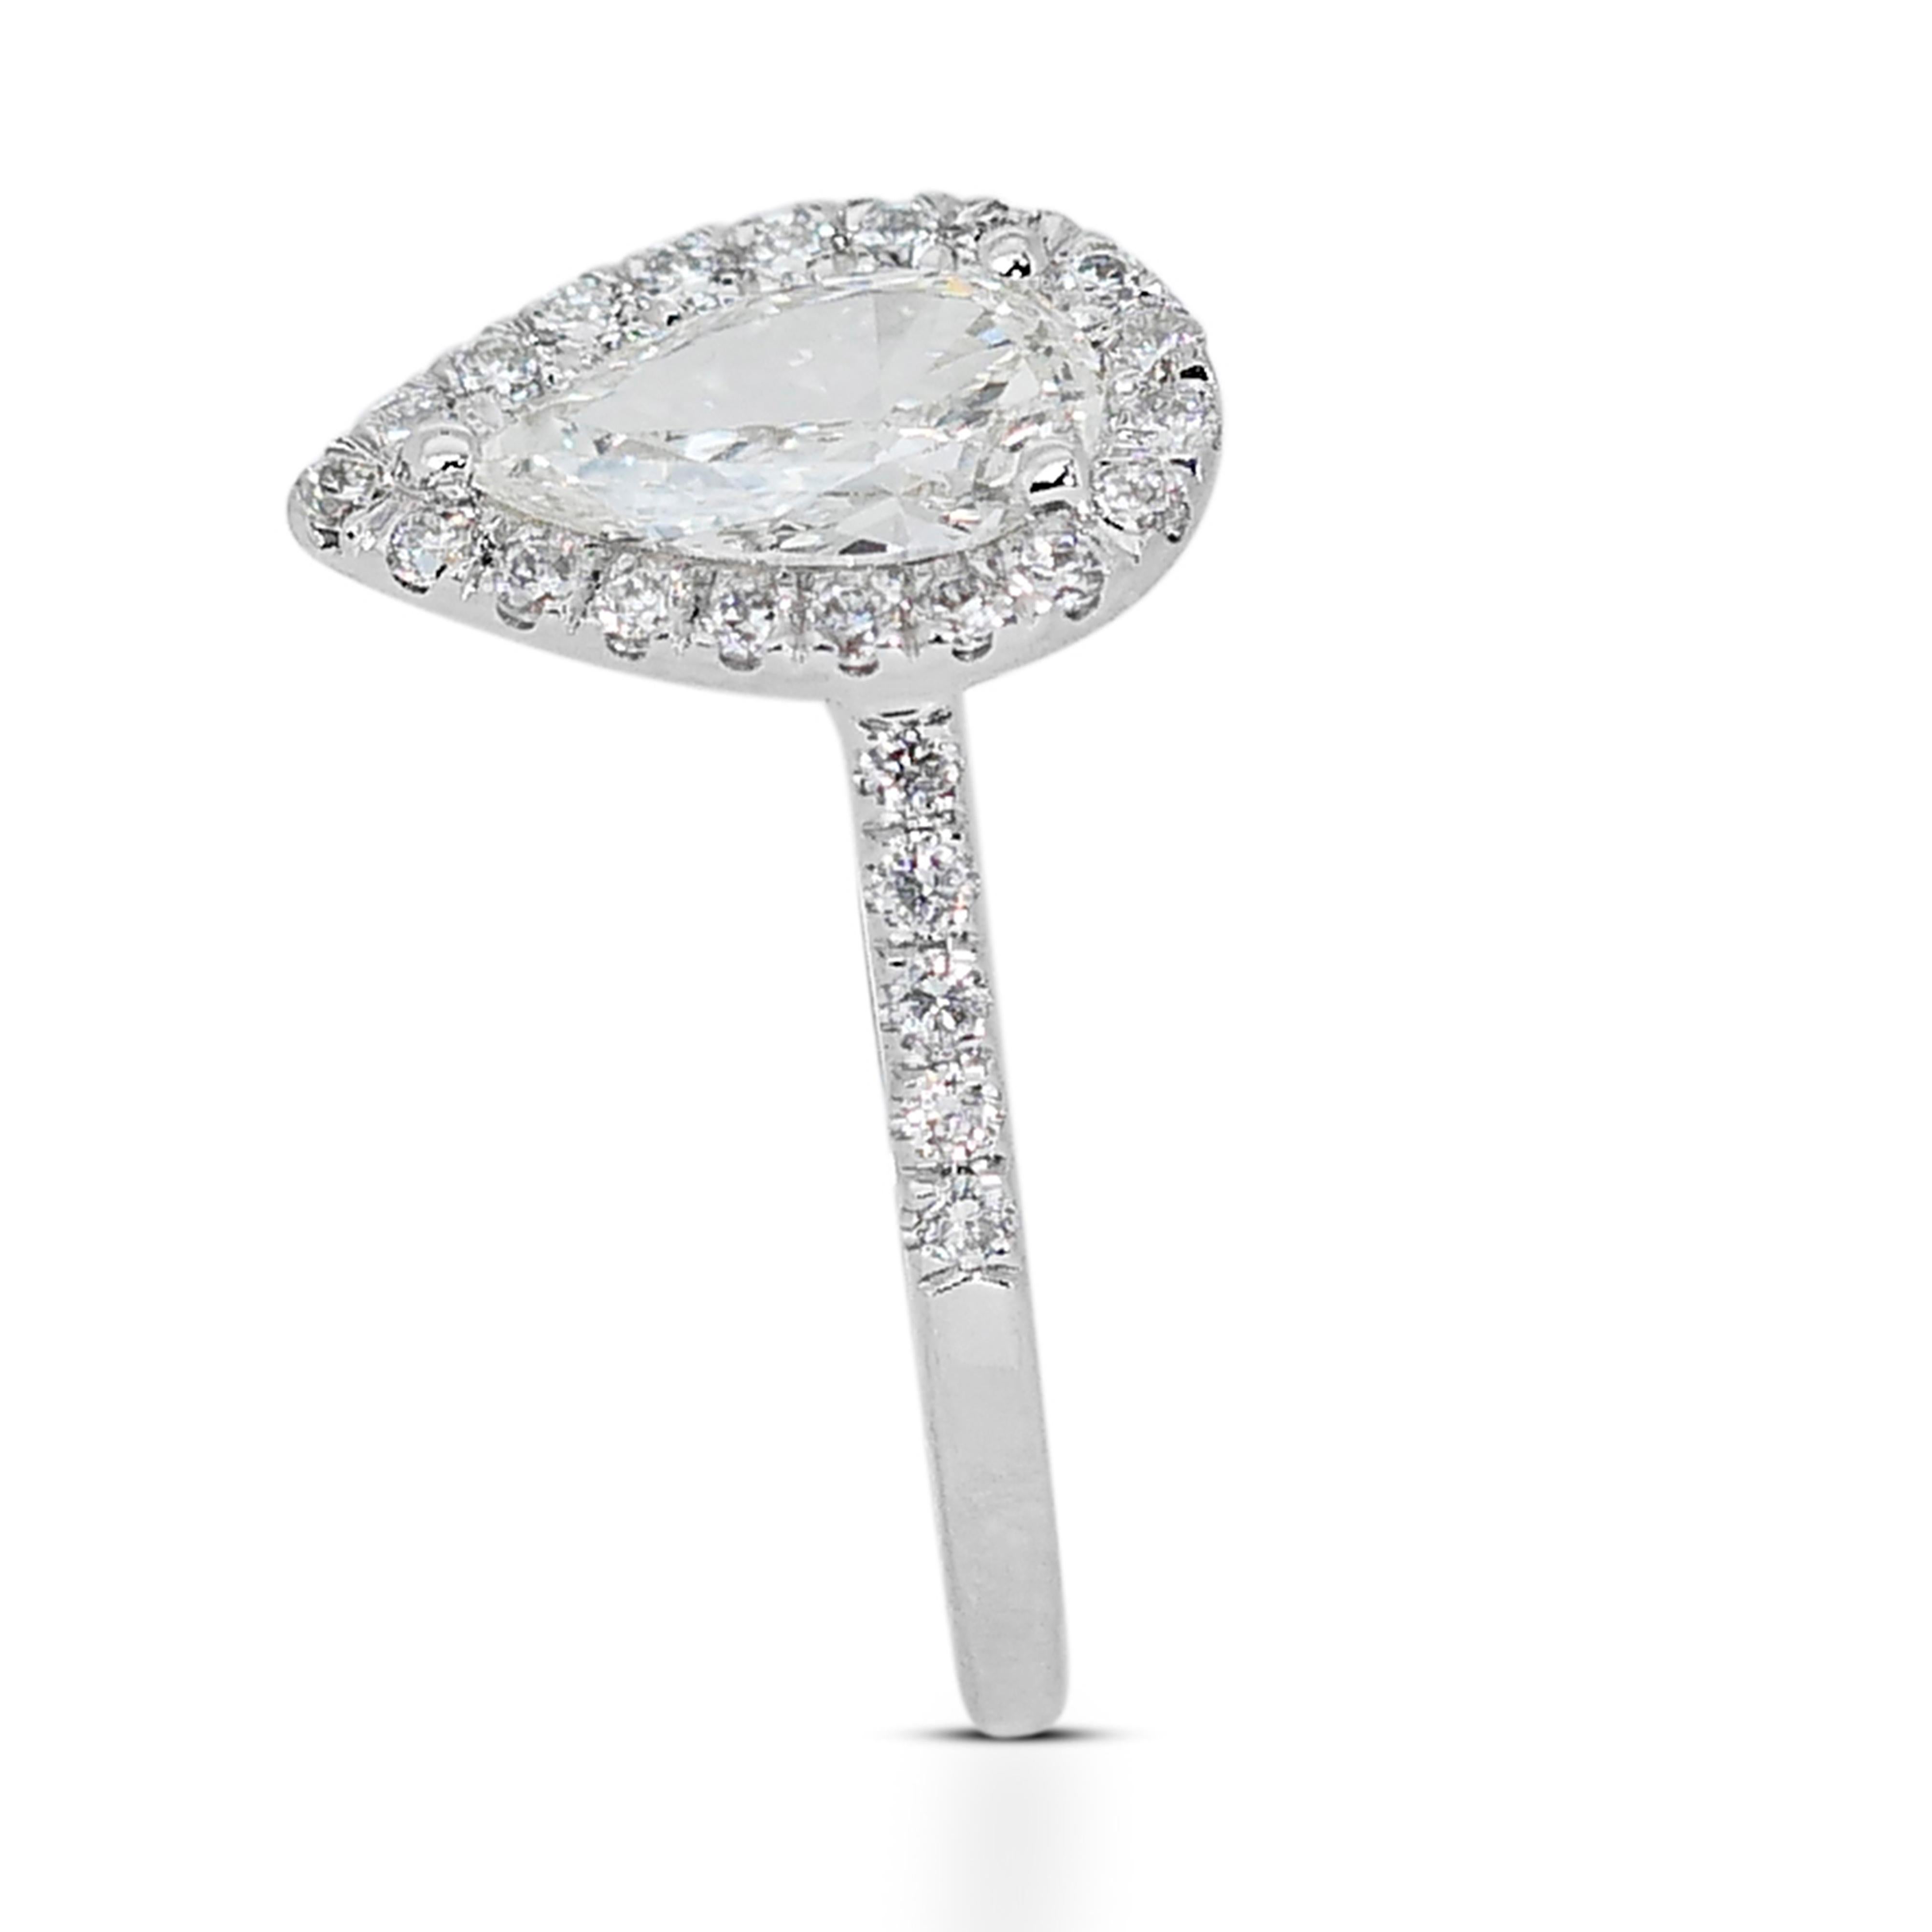 Stunning 1.97ct Pear-Shaped Diamond Halo Ring in 18k White Gold - GIA Certified For Sale 1